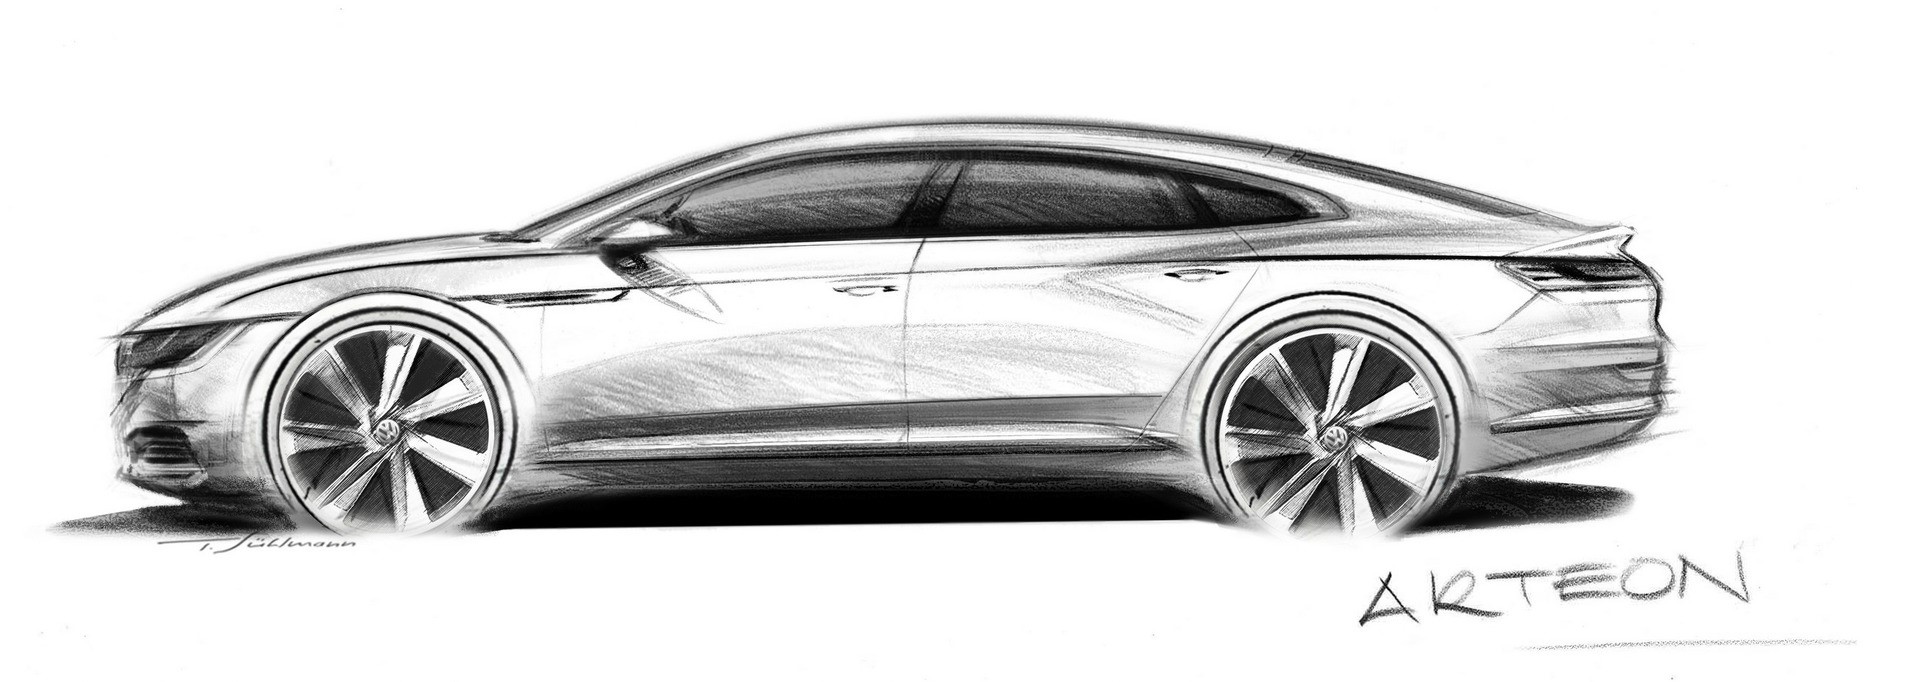 Volkswagen Sports Coupe Concept GTE The all-new Arteon design Sketch